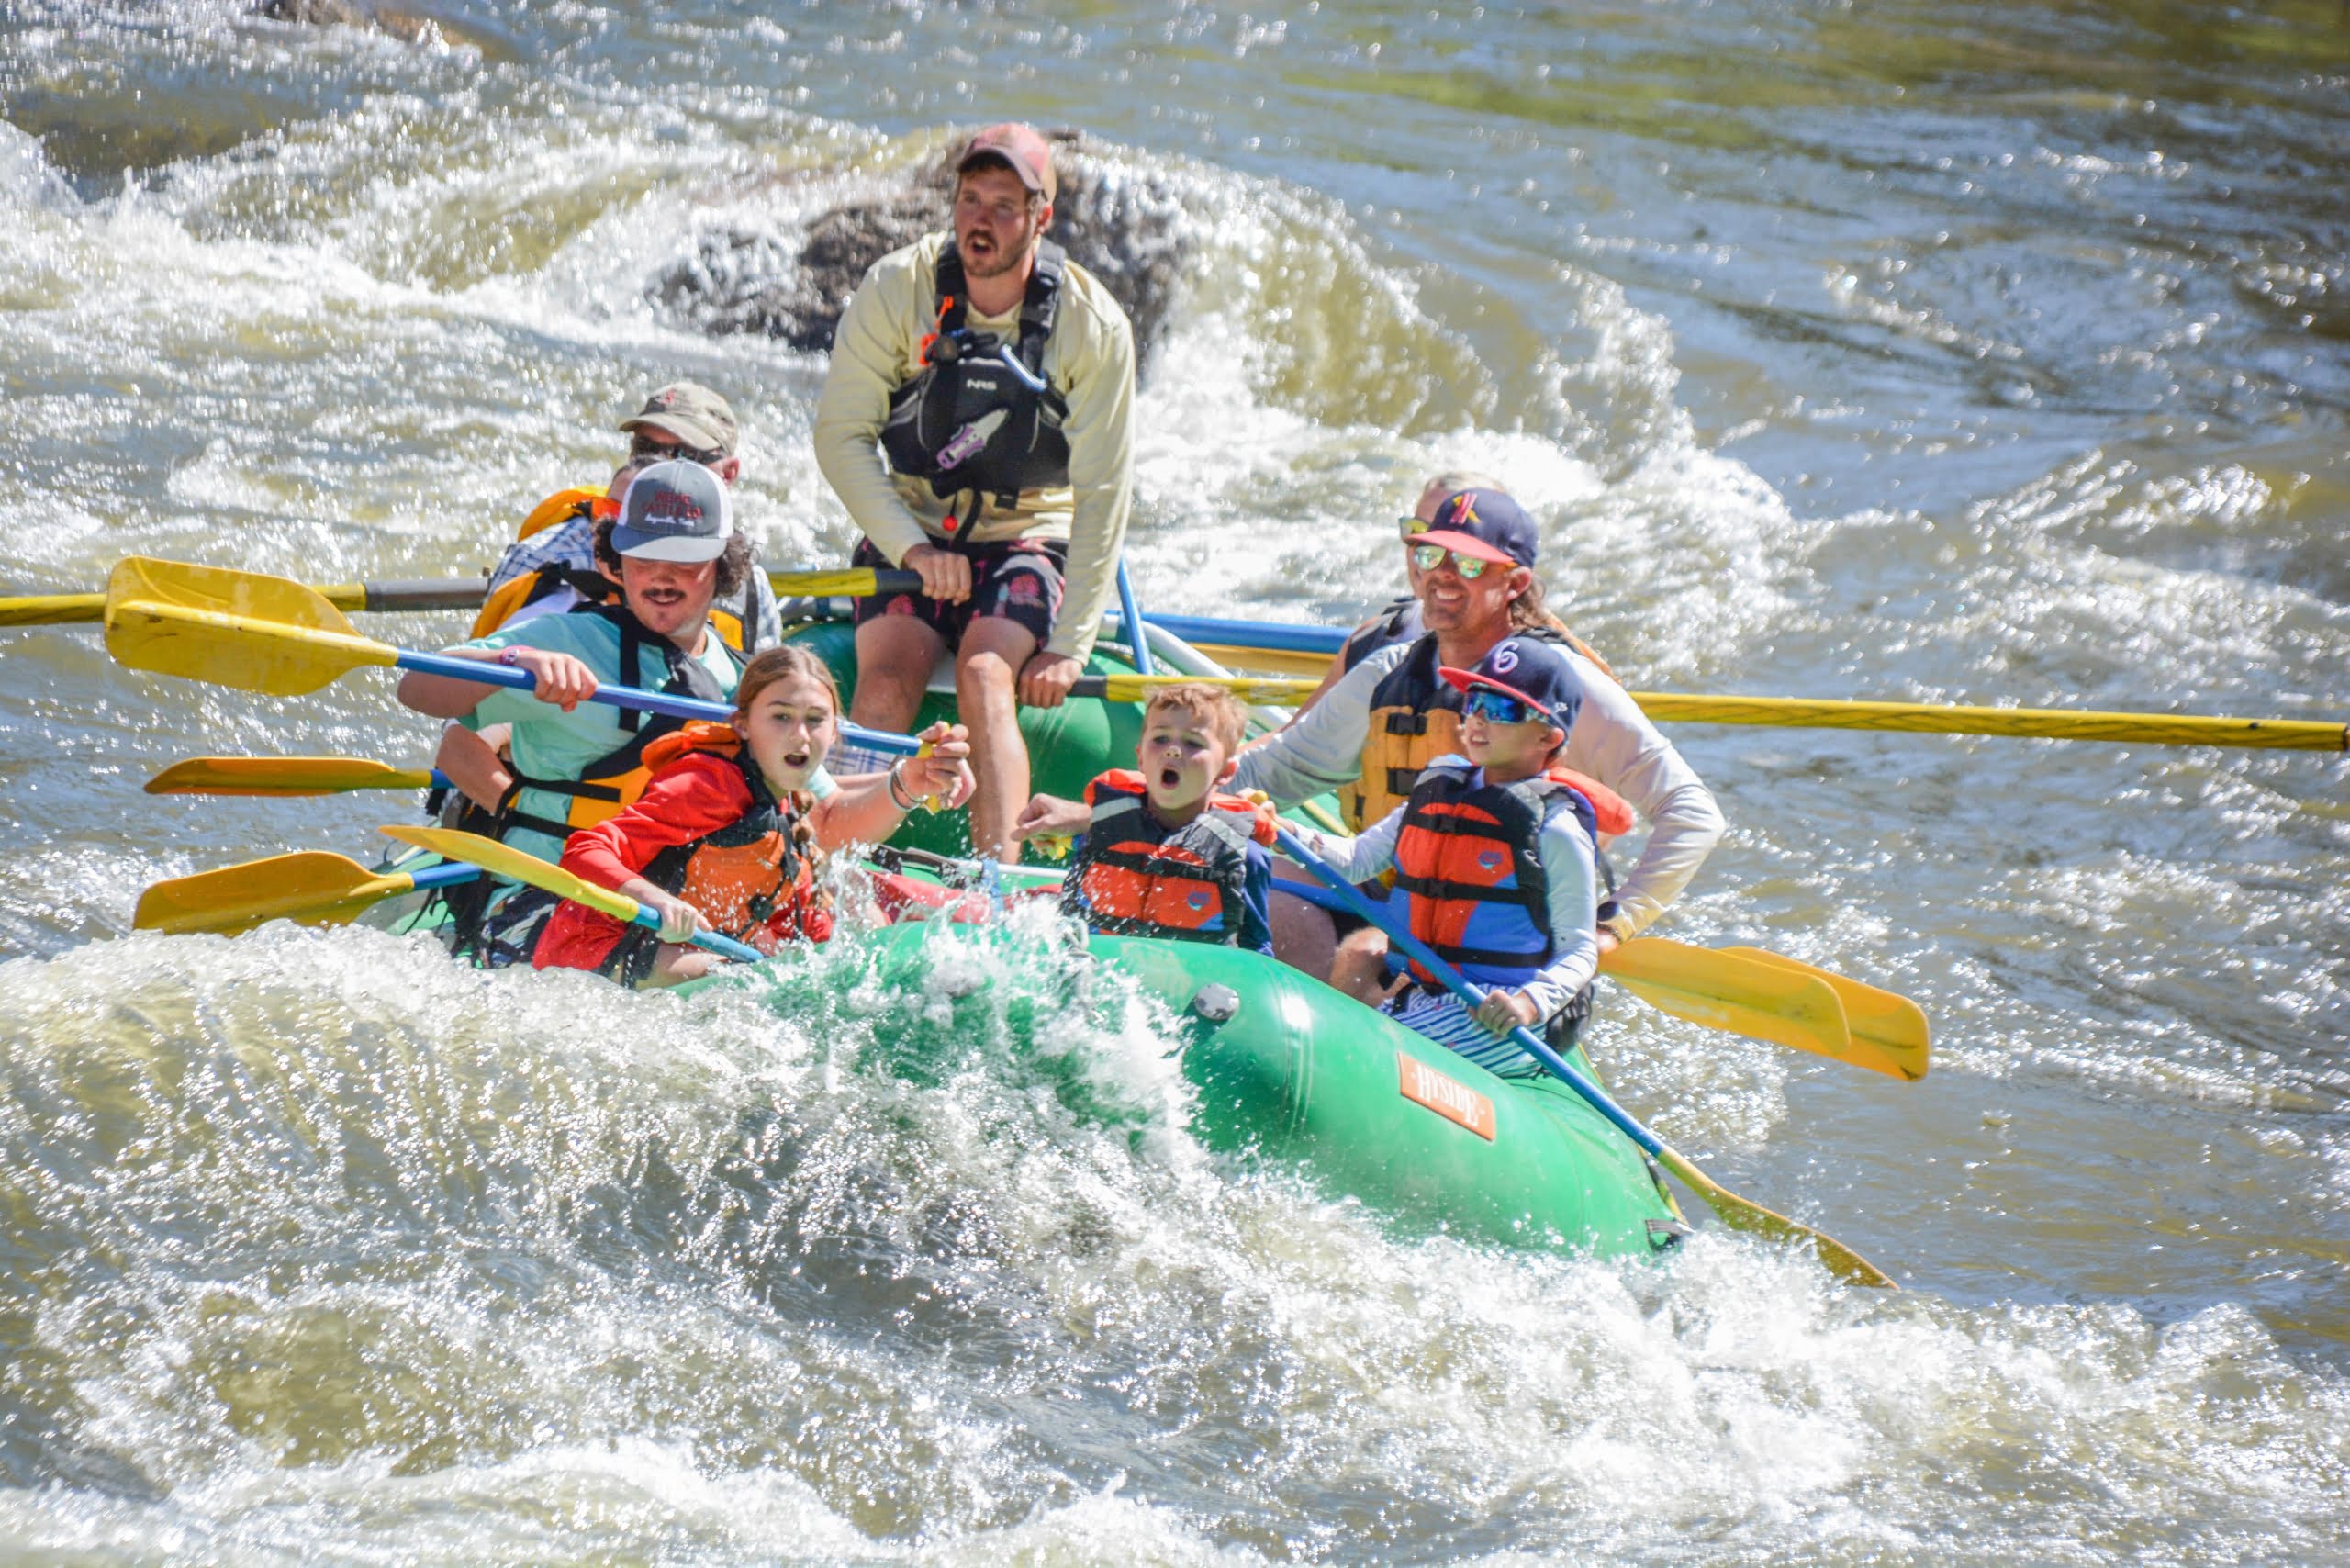 Whitewater rafting options close to Denver